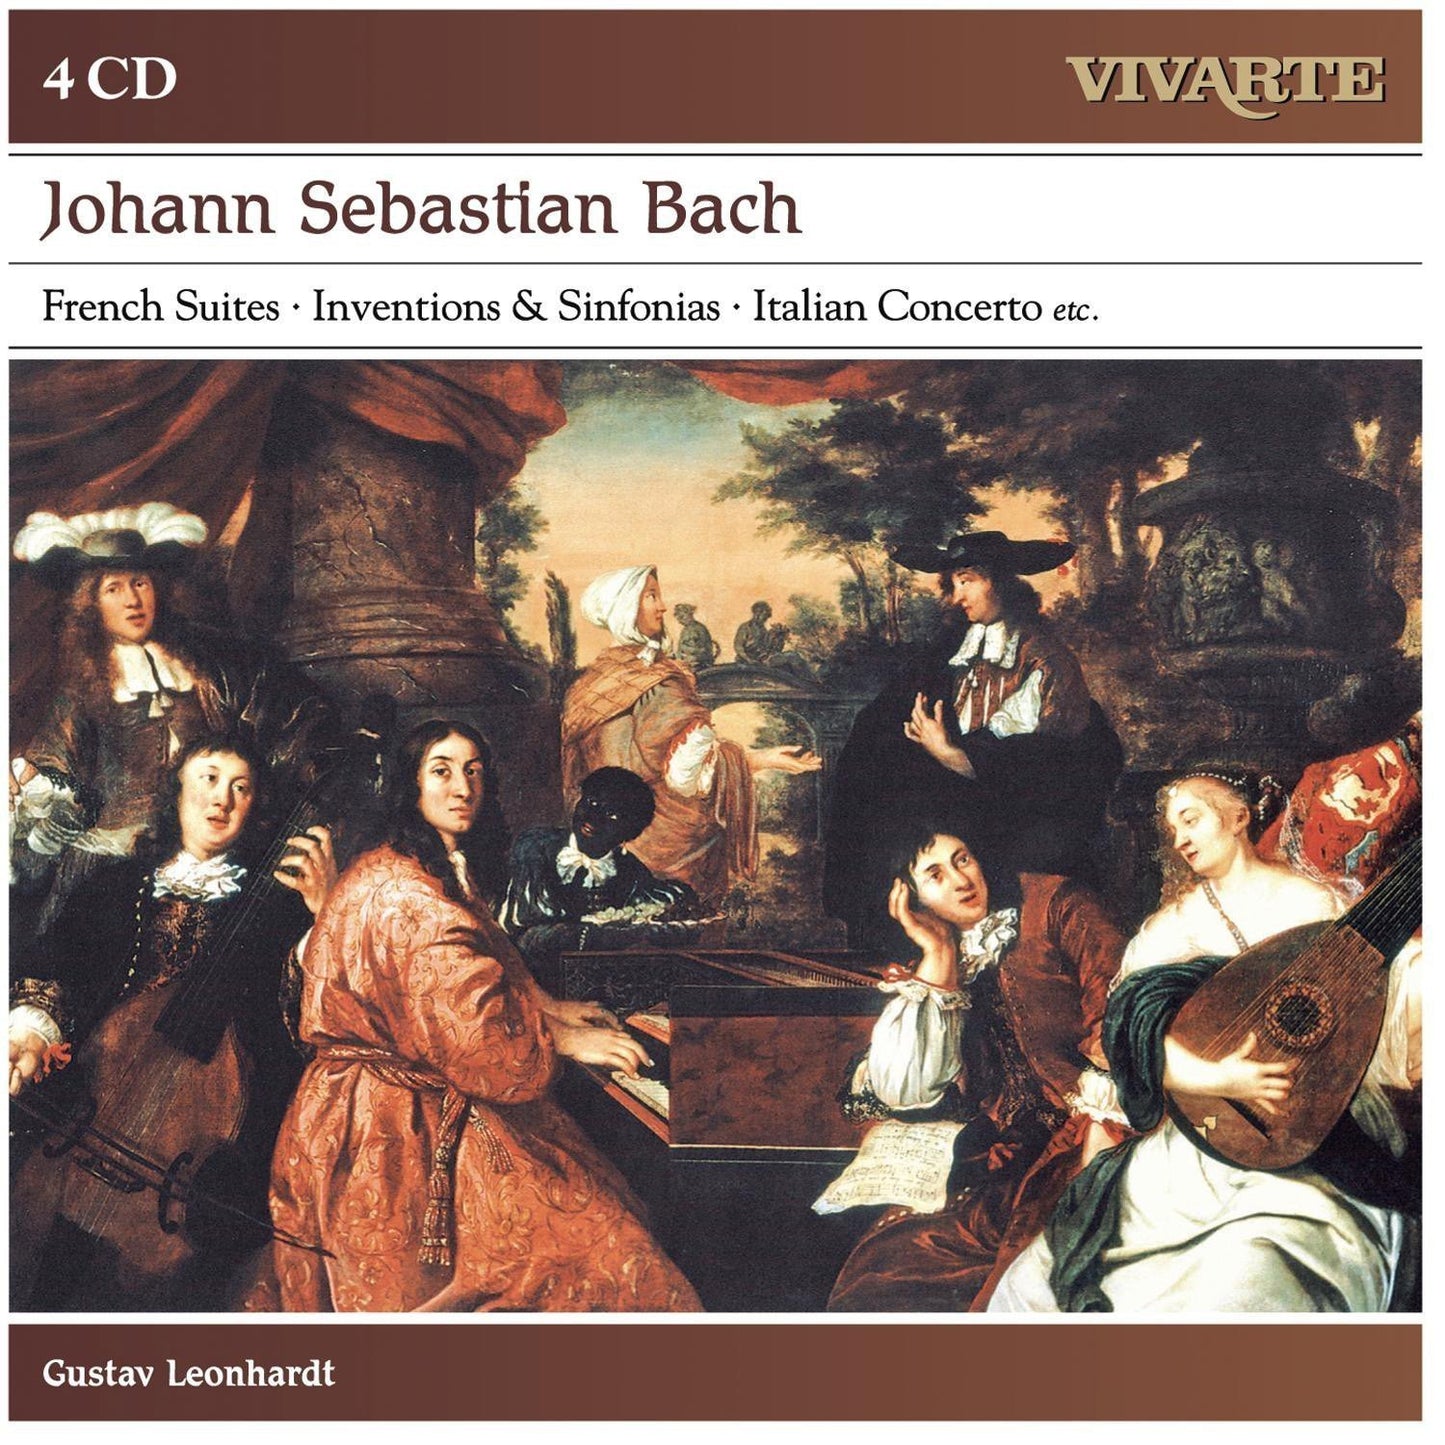 BACH, J.S.: FRENCH SUITES, INVENTIONS and OTHER WORKS - Gustav Leonhardt (4 CDs)